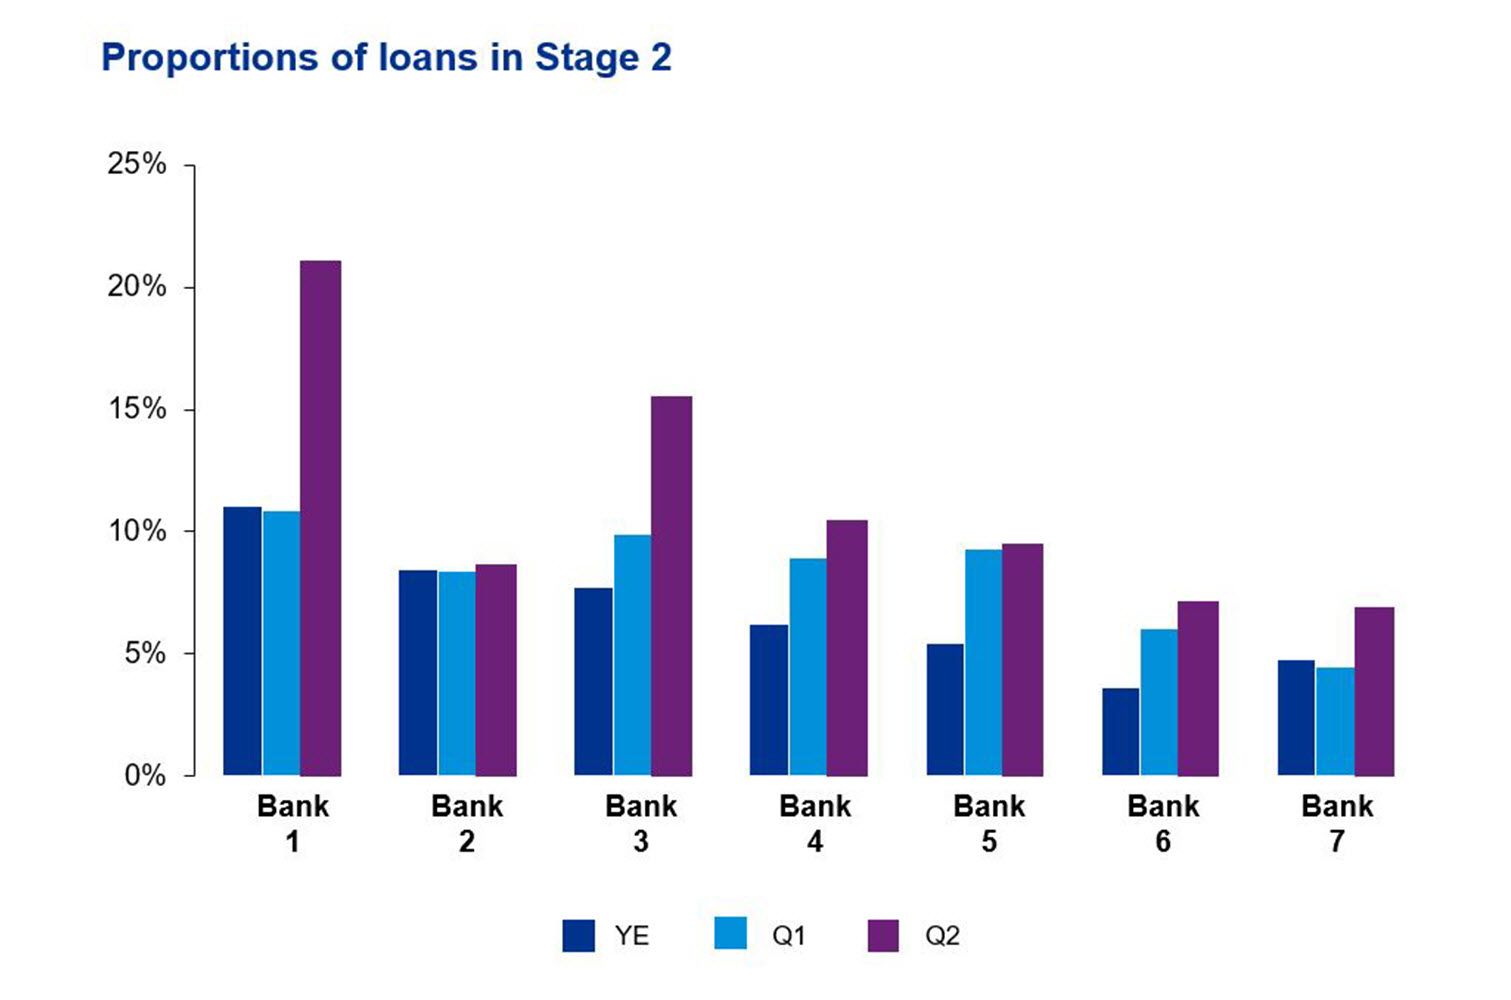 Proportions of loans in stage 2